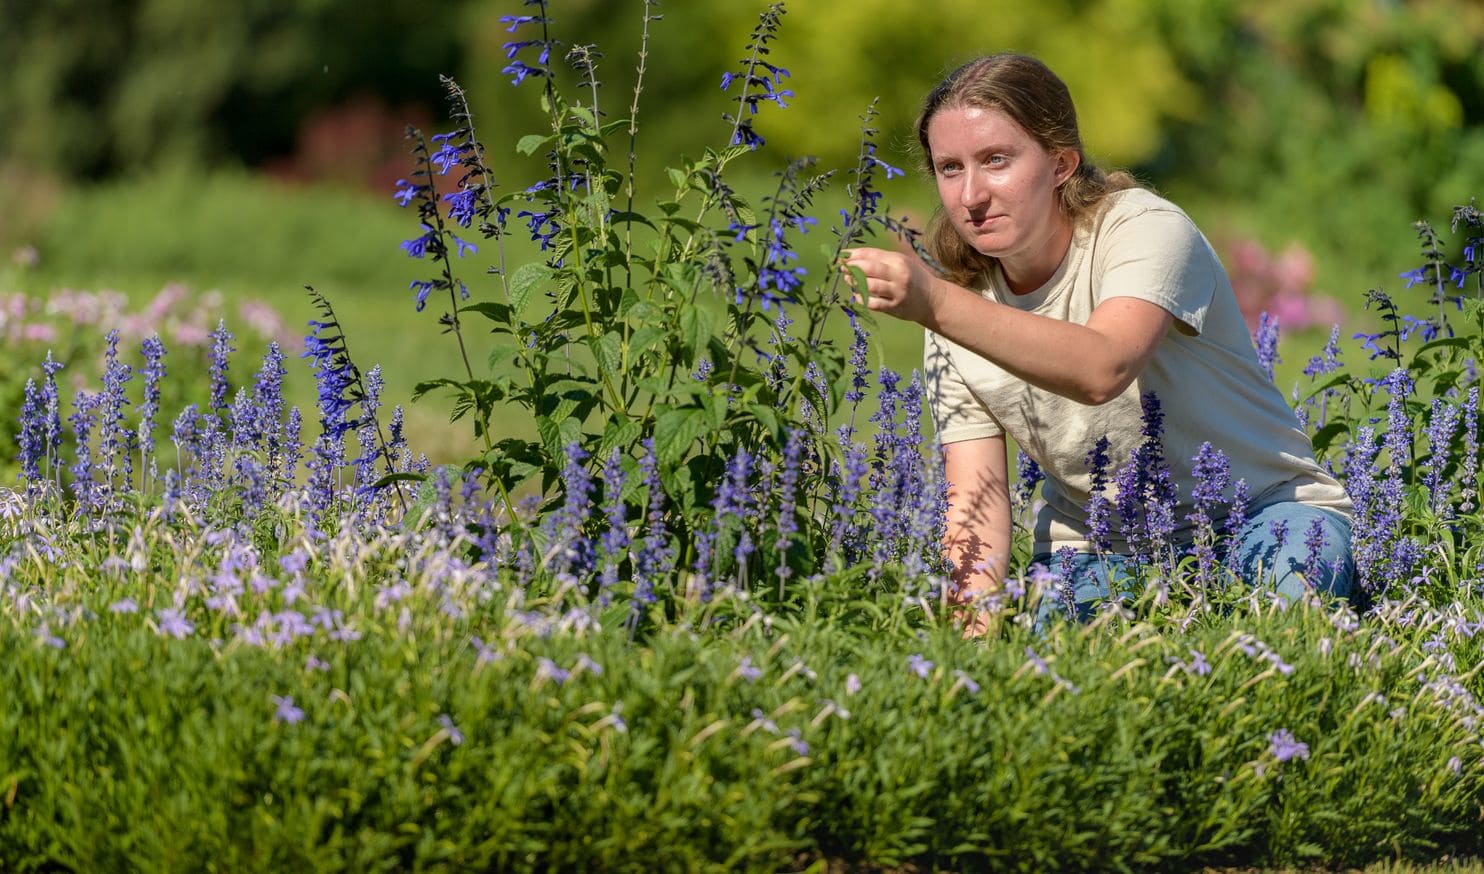 Nora Palmer, 21, works at Hershey Gardens in Hershey, Pa., on July 19. “Everything you do in horticulture is wonderful,” Palmer said. “Almost magical.” (Jim Graham/For The Washington Post)